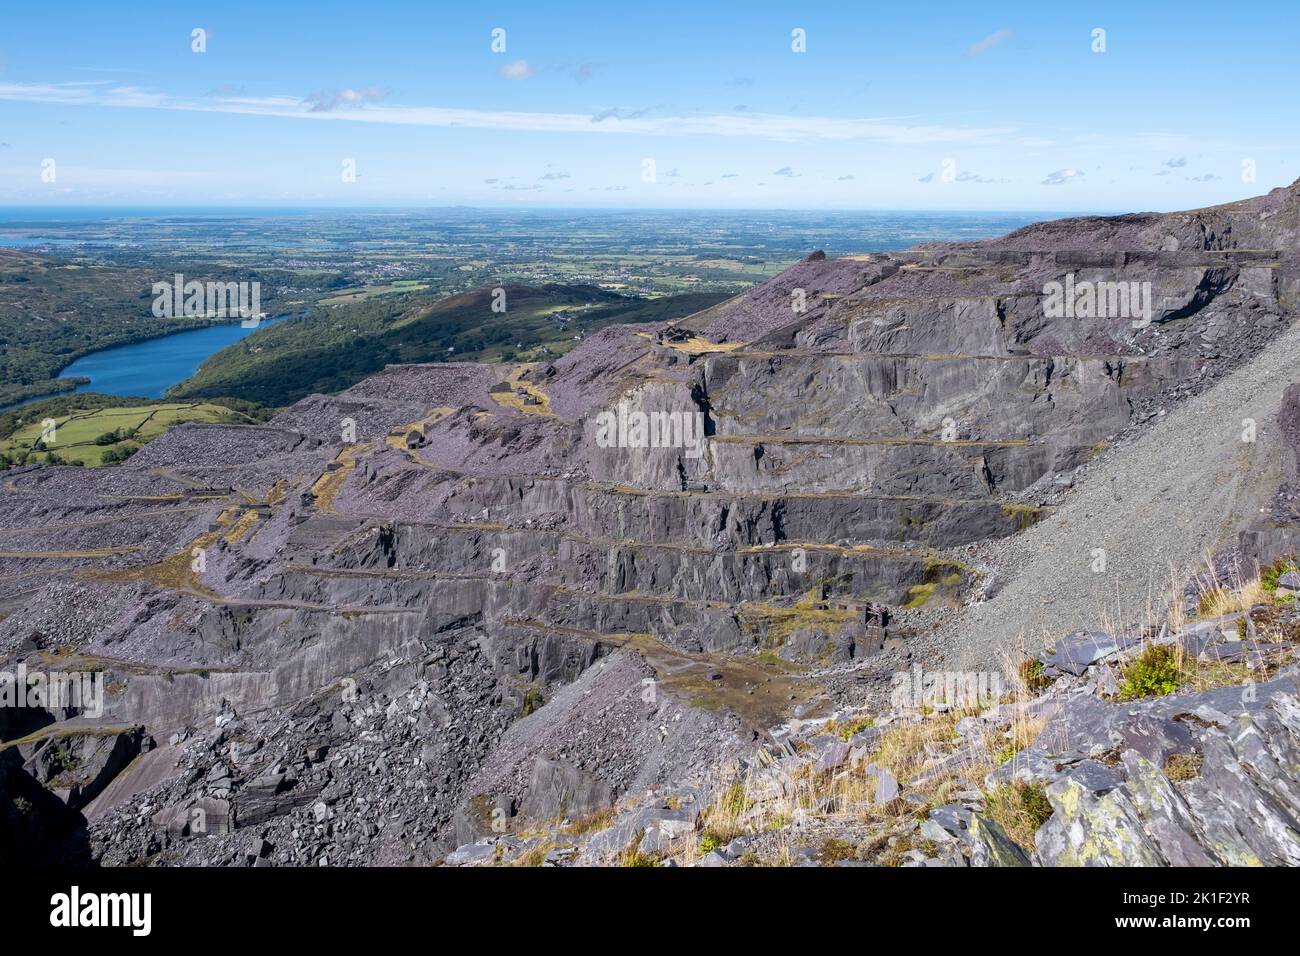 Views of Dinorwic Slate Quarry, situated near the villages of Dinorwig and Llanberis, Snowdonia, North Wales, United Kingdom. Stock Photo